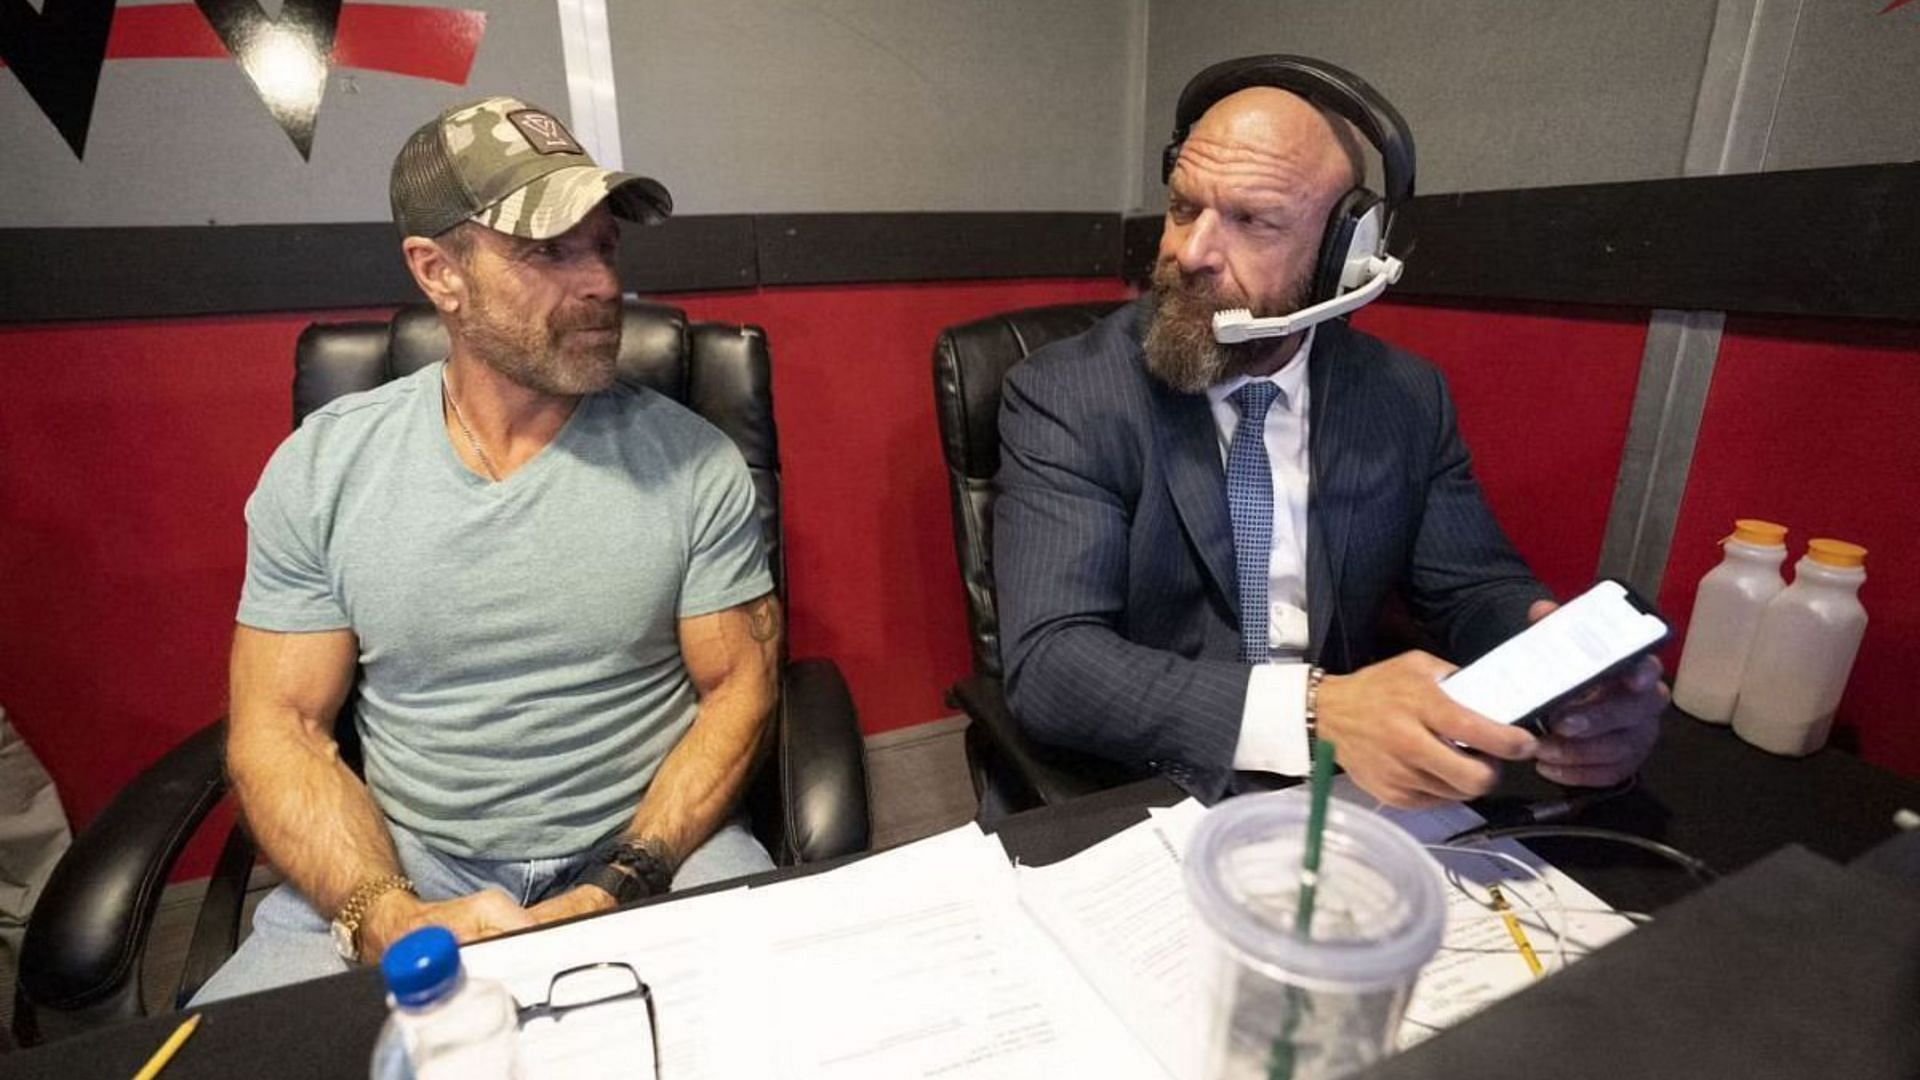 Shawn Michaels apologized to Triple H after quitting drugs